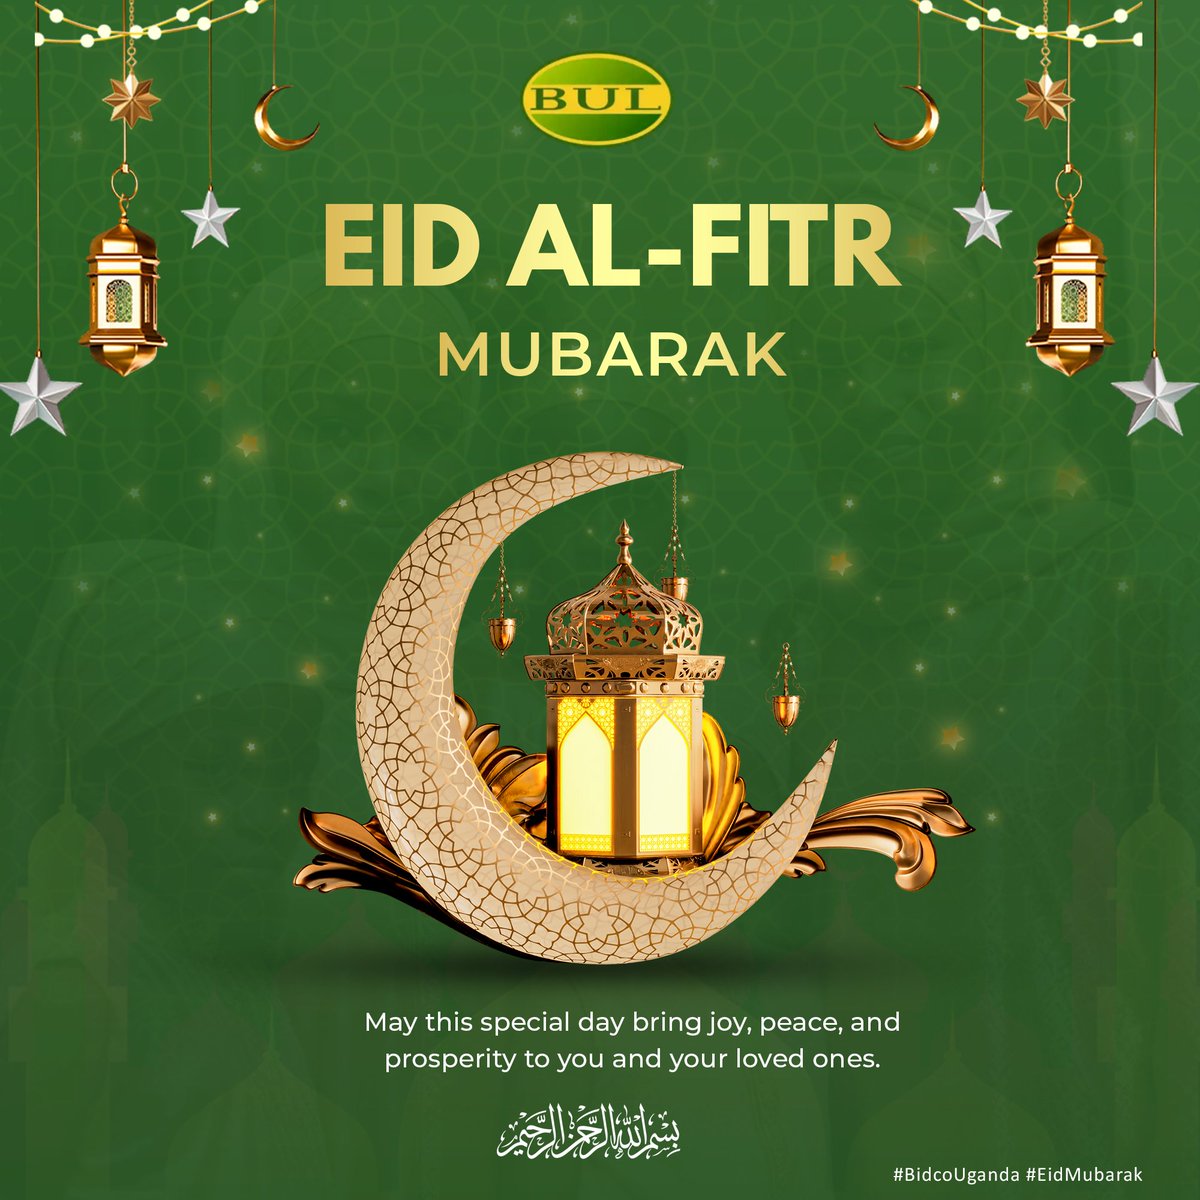 Eid Mubarak from Bidco Uganda! 🌙 As the crescent moon graced the sky, We Celebrate The Joyous Occasion of Eid Al-Fitr With Our Muslim Brothers and Sisters. May this day be filled with blessings, happiness, and the sweet aroma of togetherness. #EidWithBidco #EidMubarak